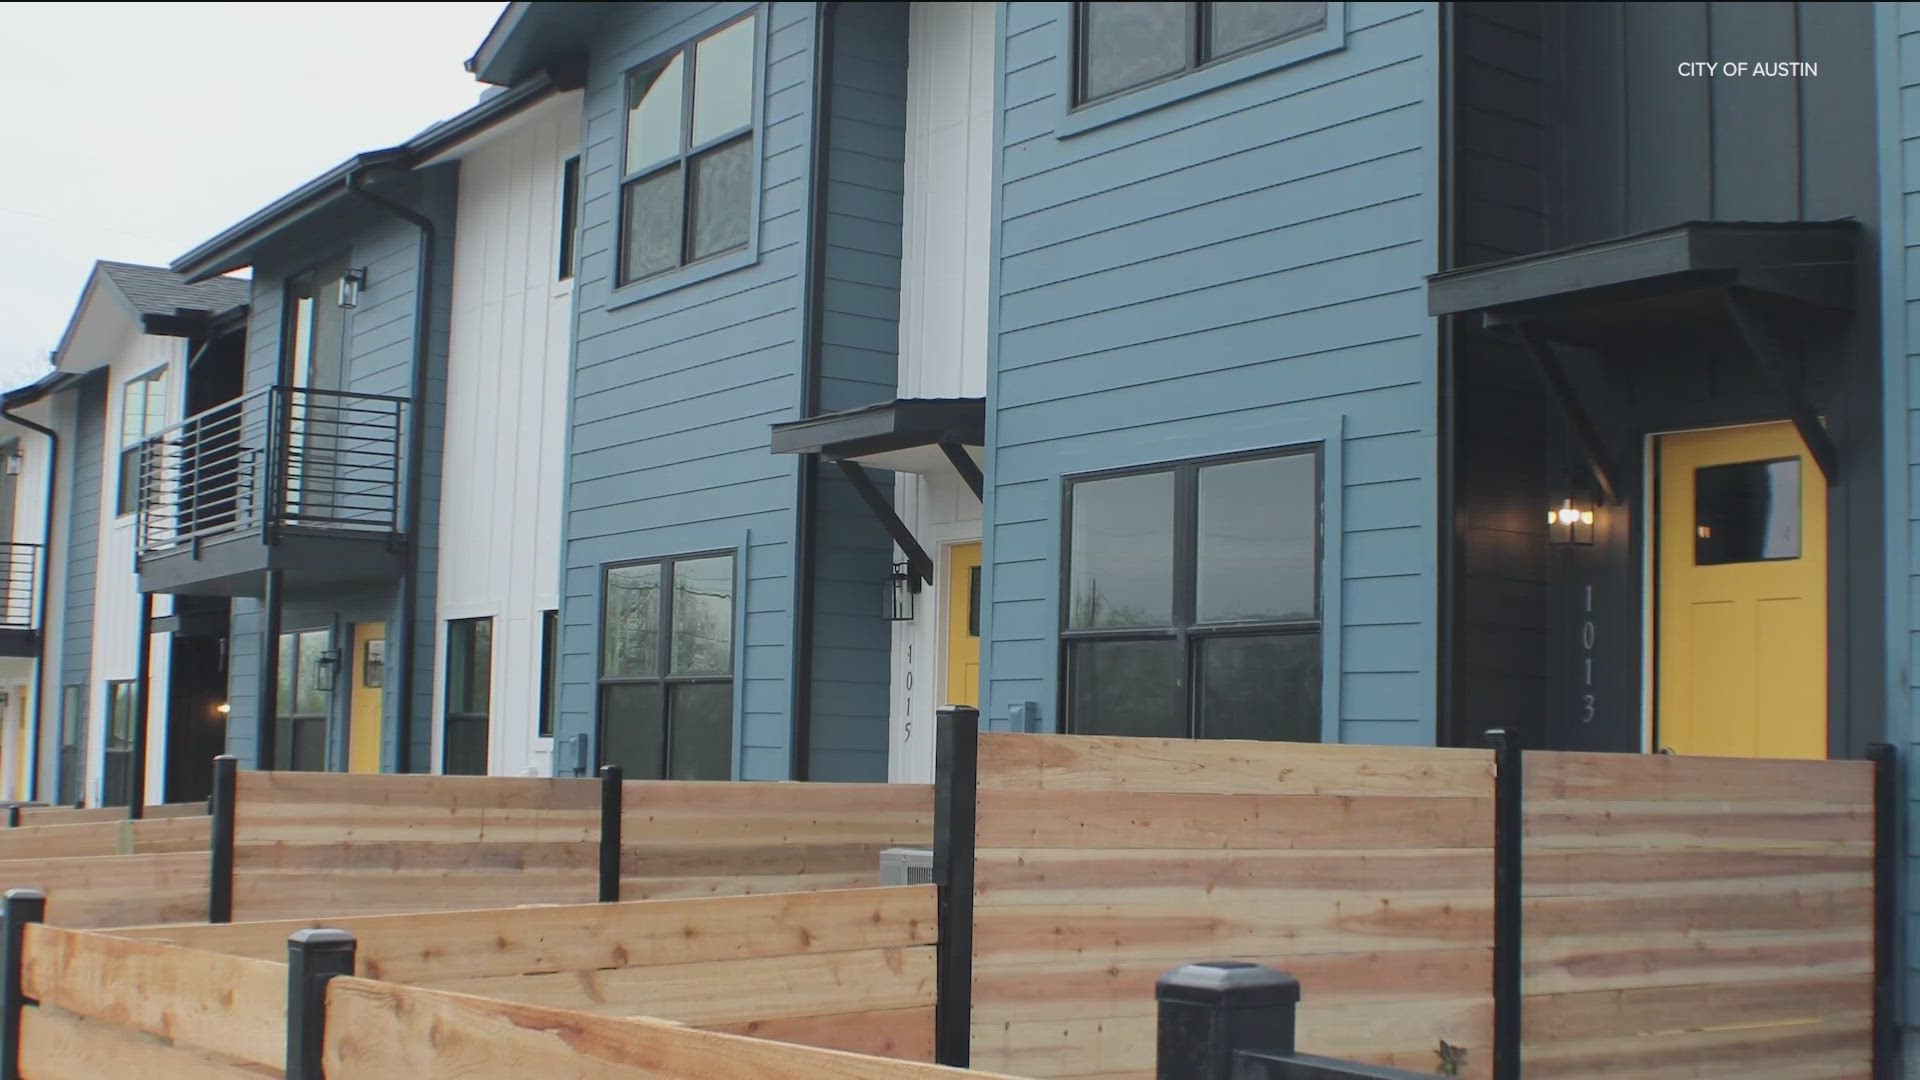 The community includes six new townhomes on East St. John Avenue.